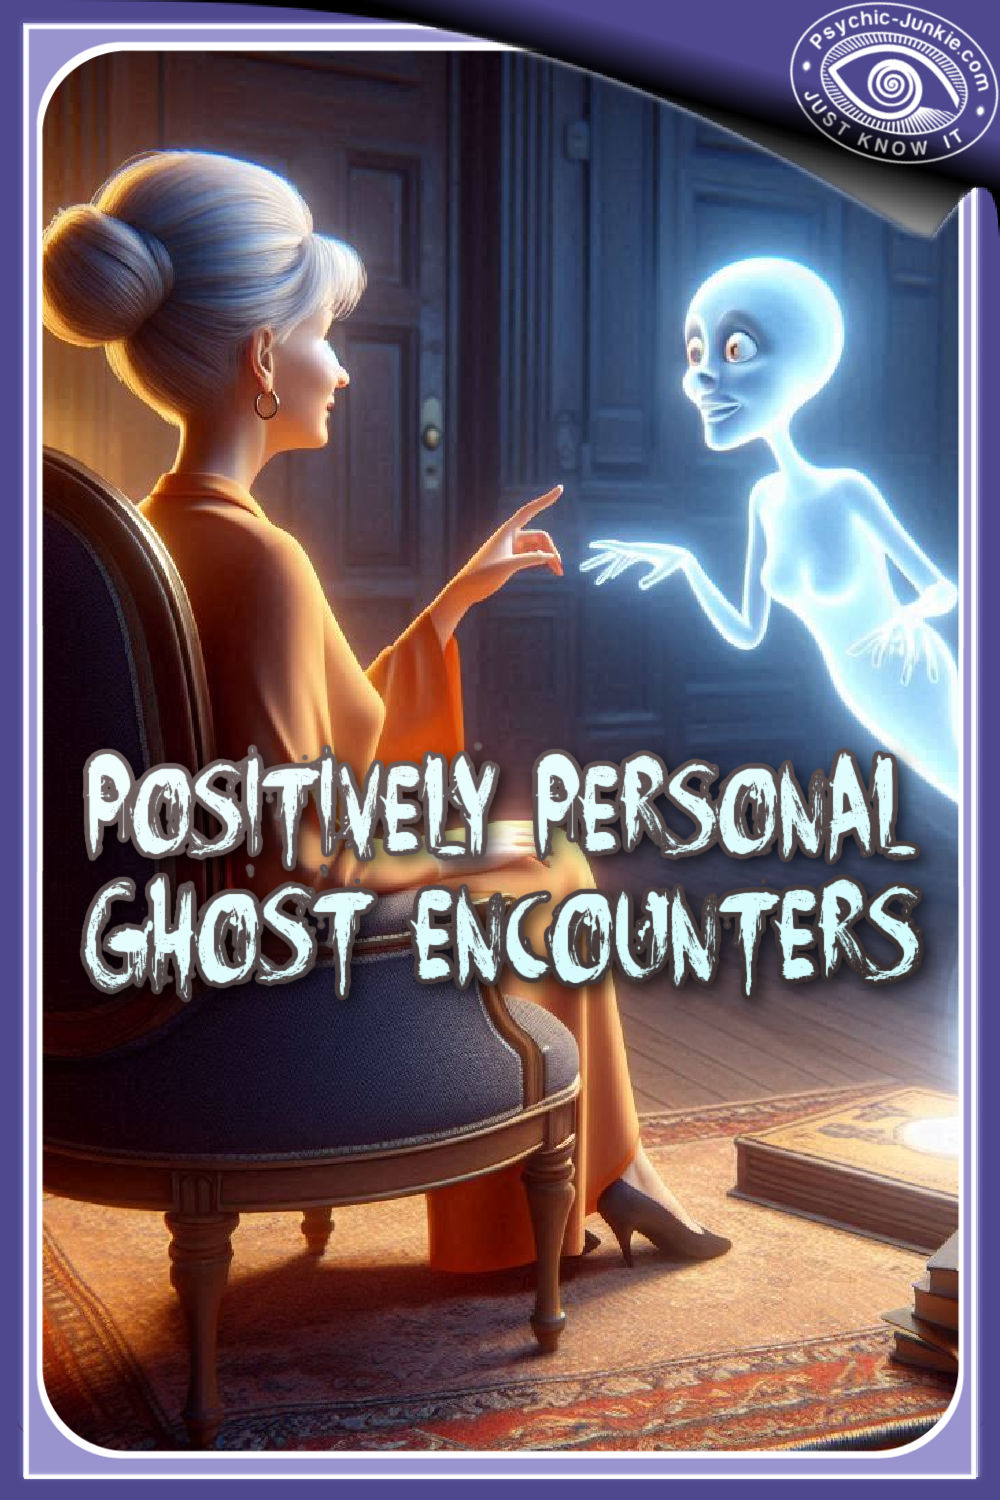 Positively Personal Ghost Encounters